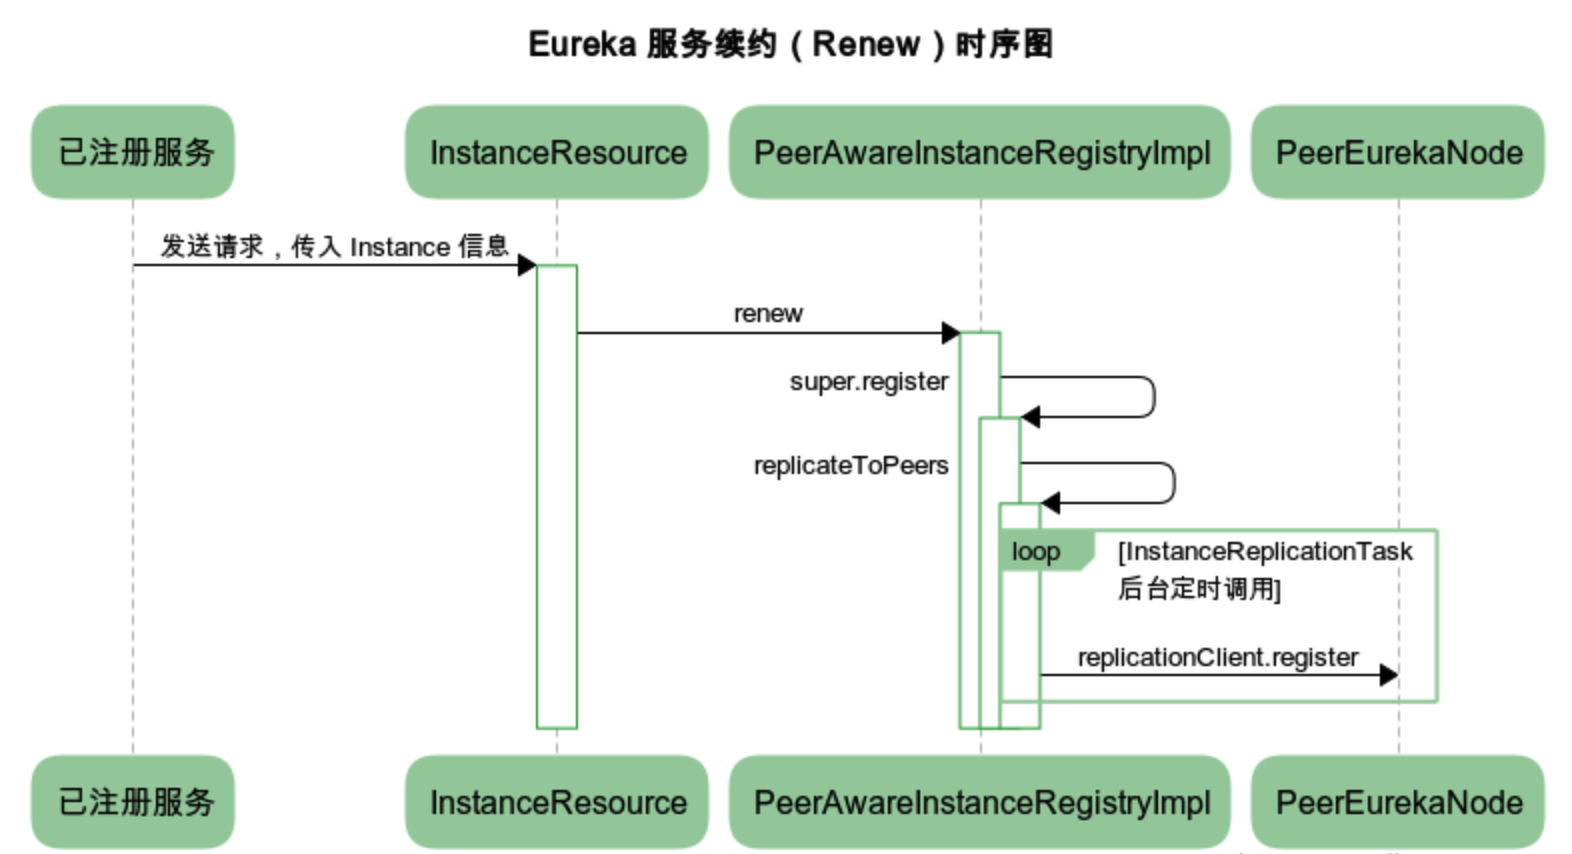 images/eureka-server-renew-sequence-chart.png